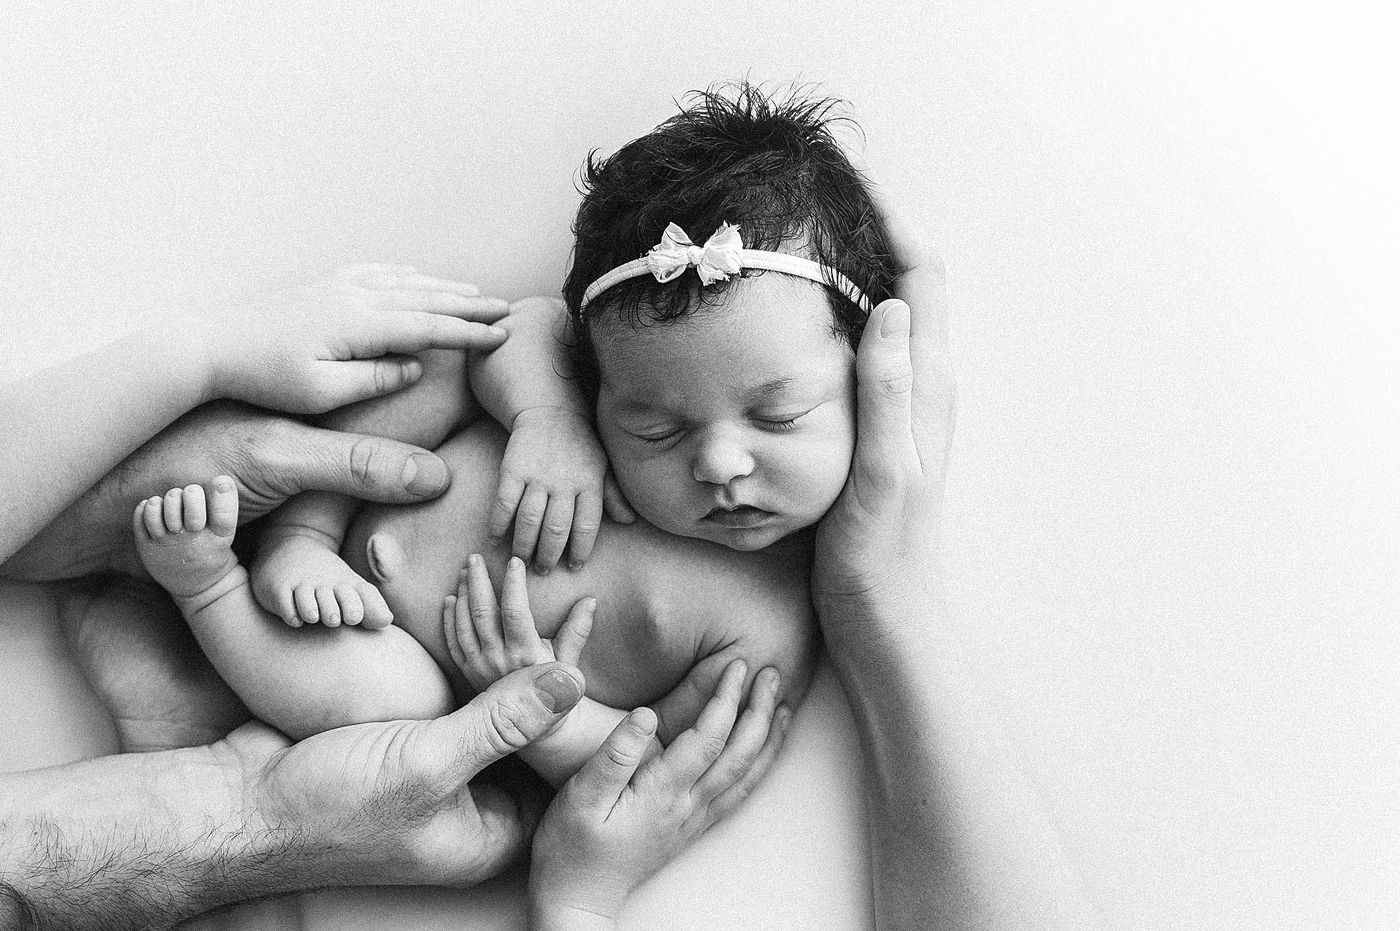 Hands of various family members lovingly embrace newborn child. Image by Meg Newton Photography.